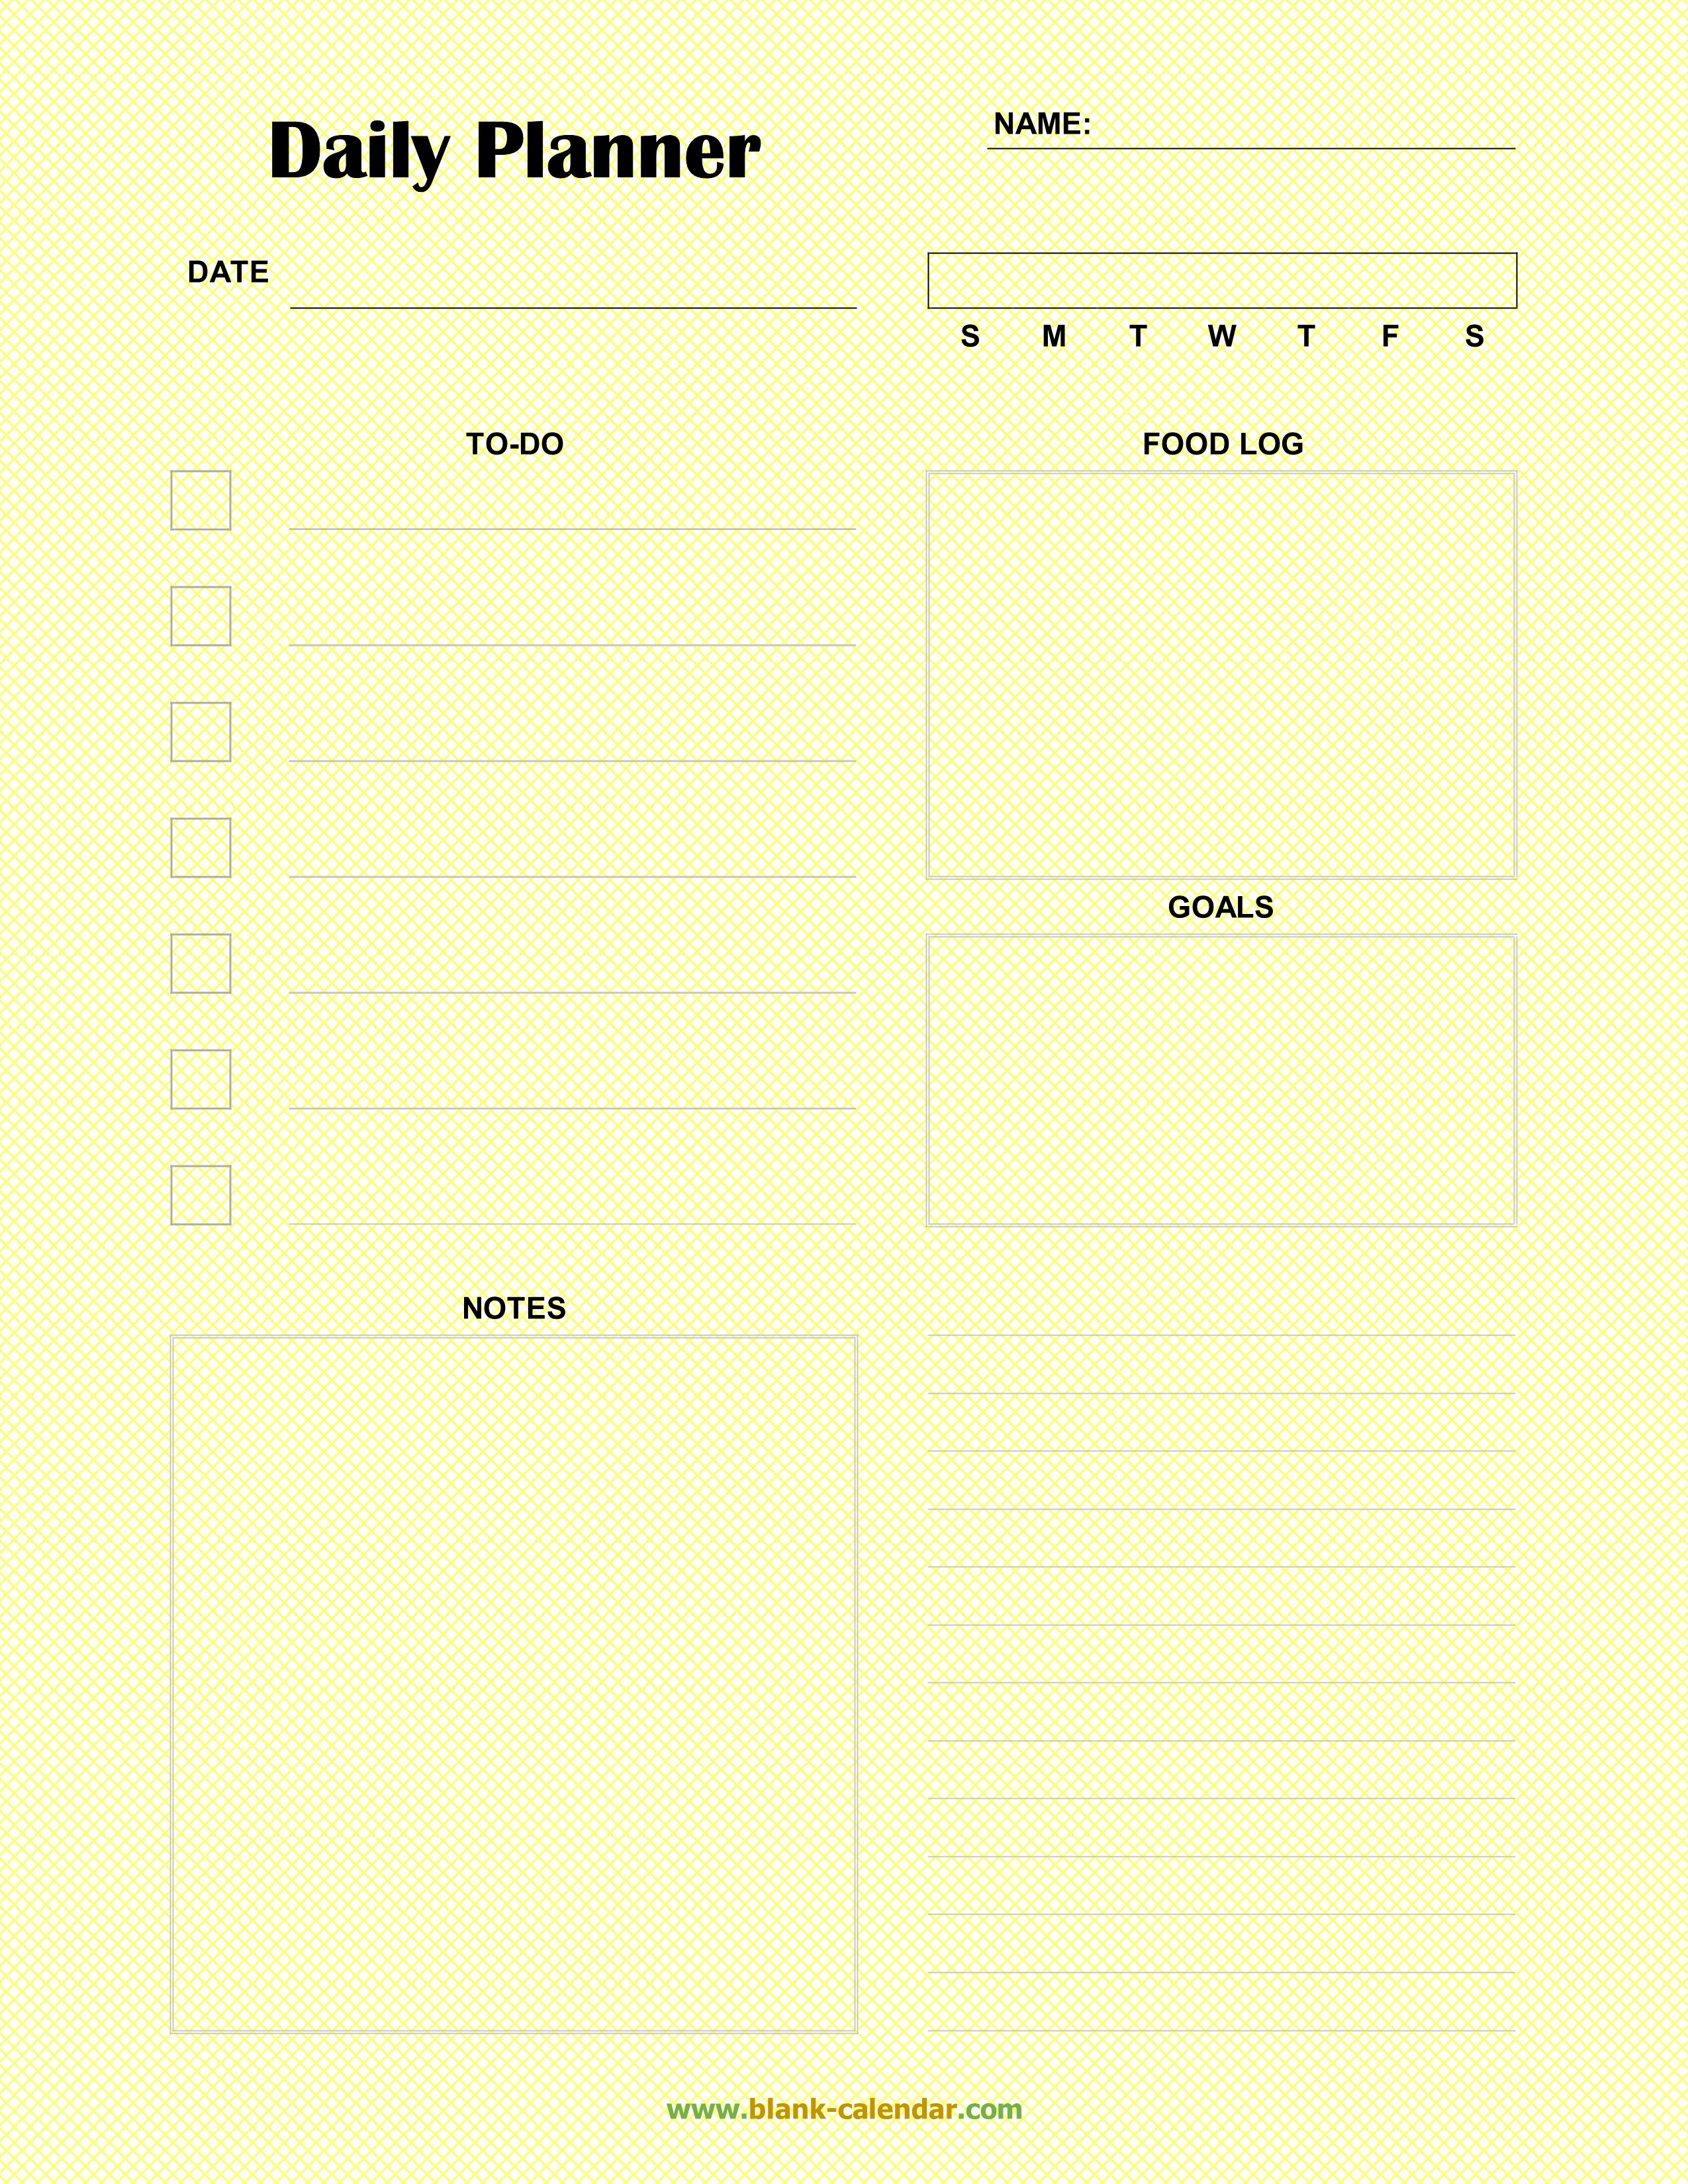 Daily Planner Template Word Awesome Daily Planner Templates Word Excel Pdf